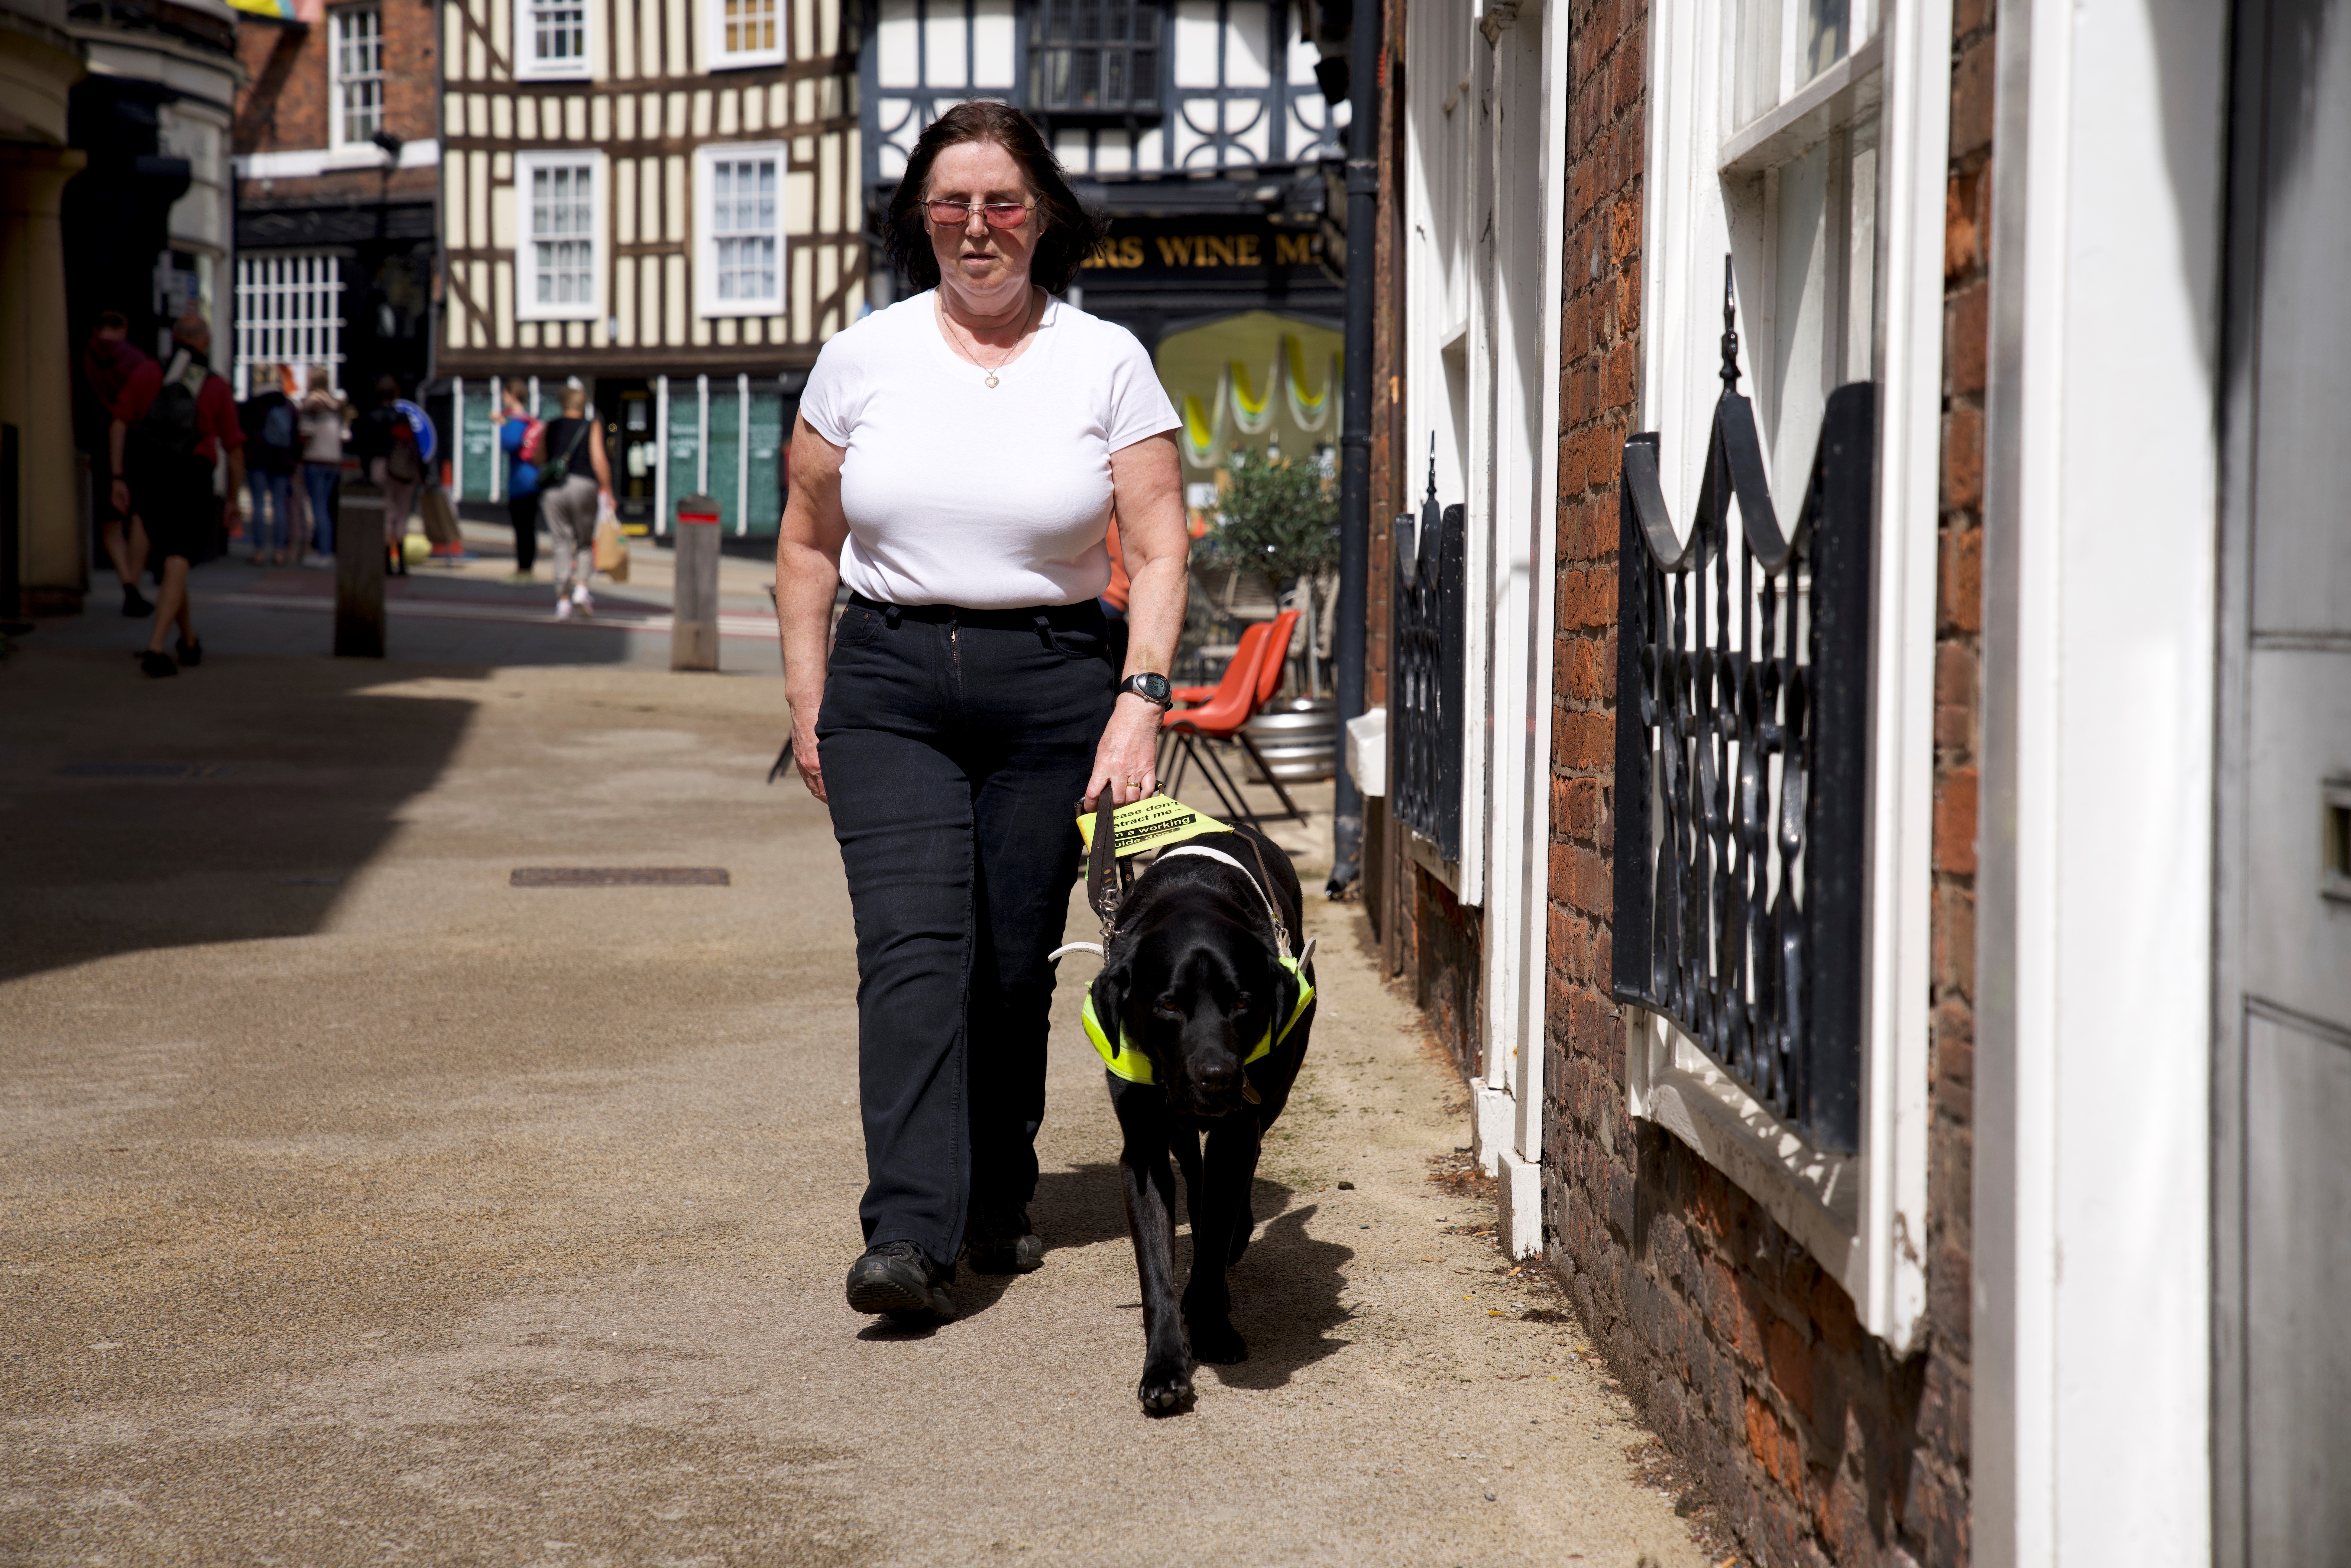 Lindsey is walking down a street being guided by Leyland, a black Labrador